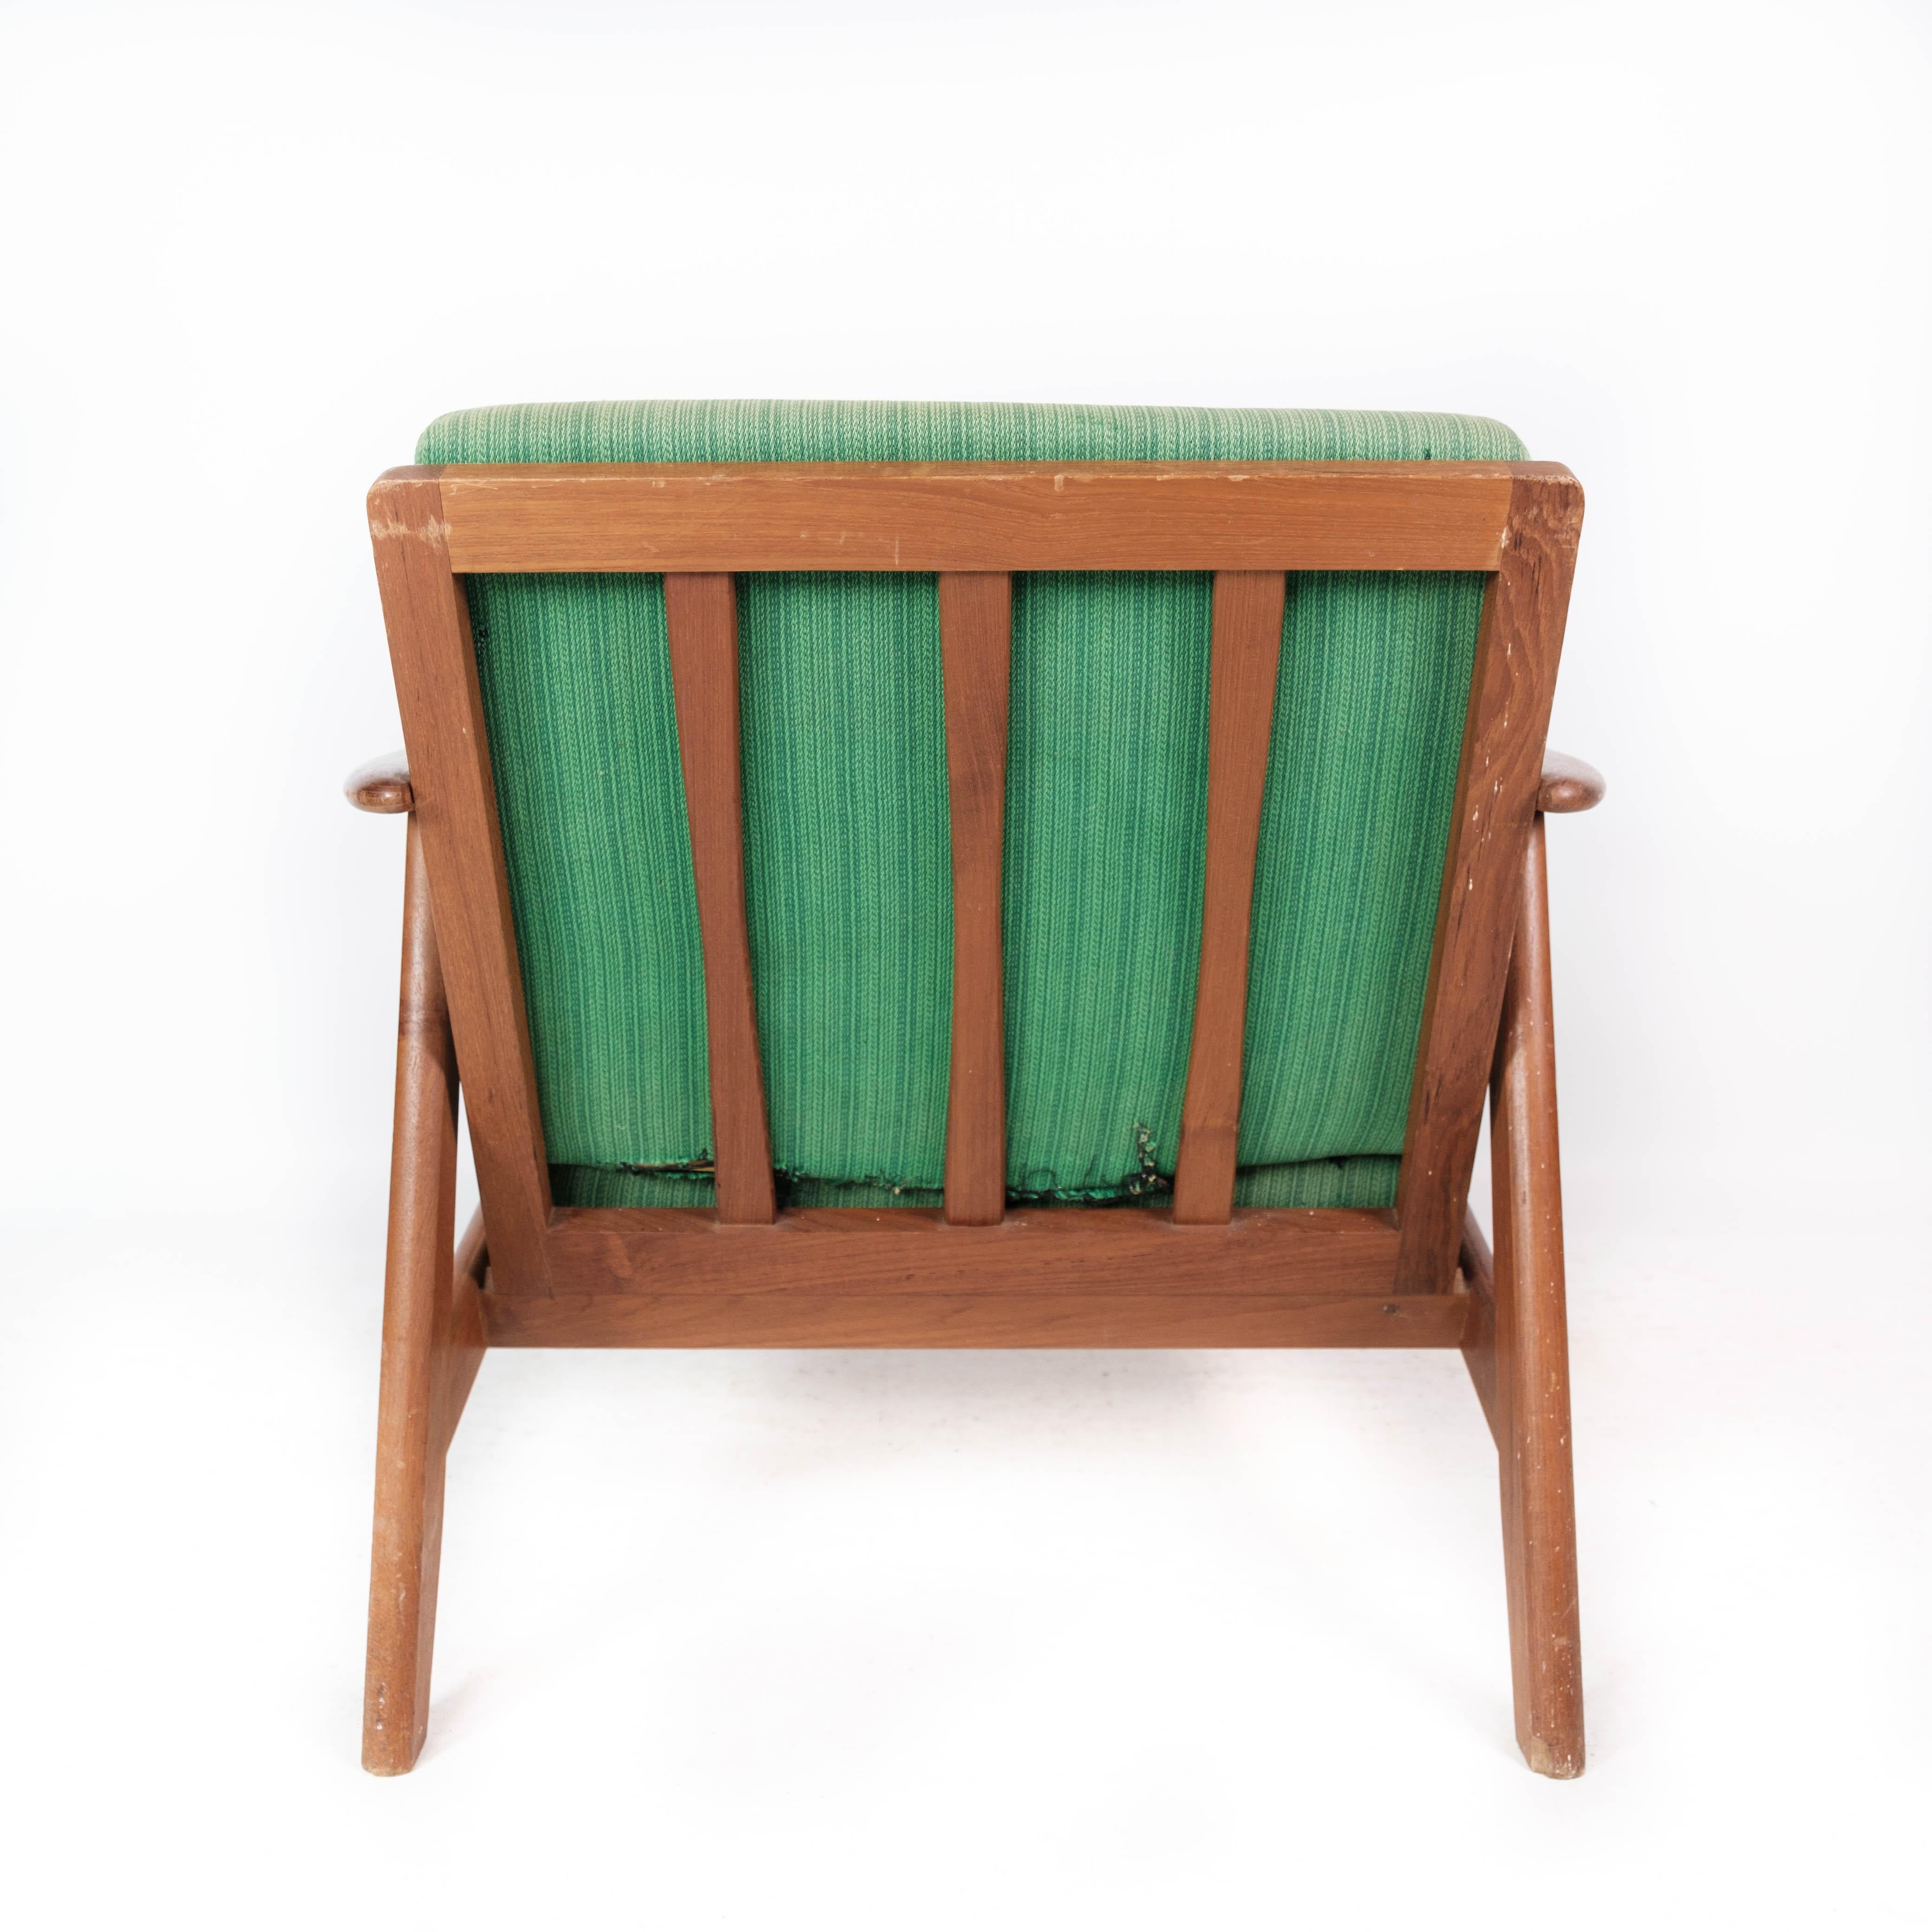 Wool Easy Chair in Teak and with Green Upholstery of Danish Design from the 1960s For Sale